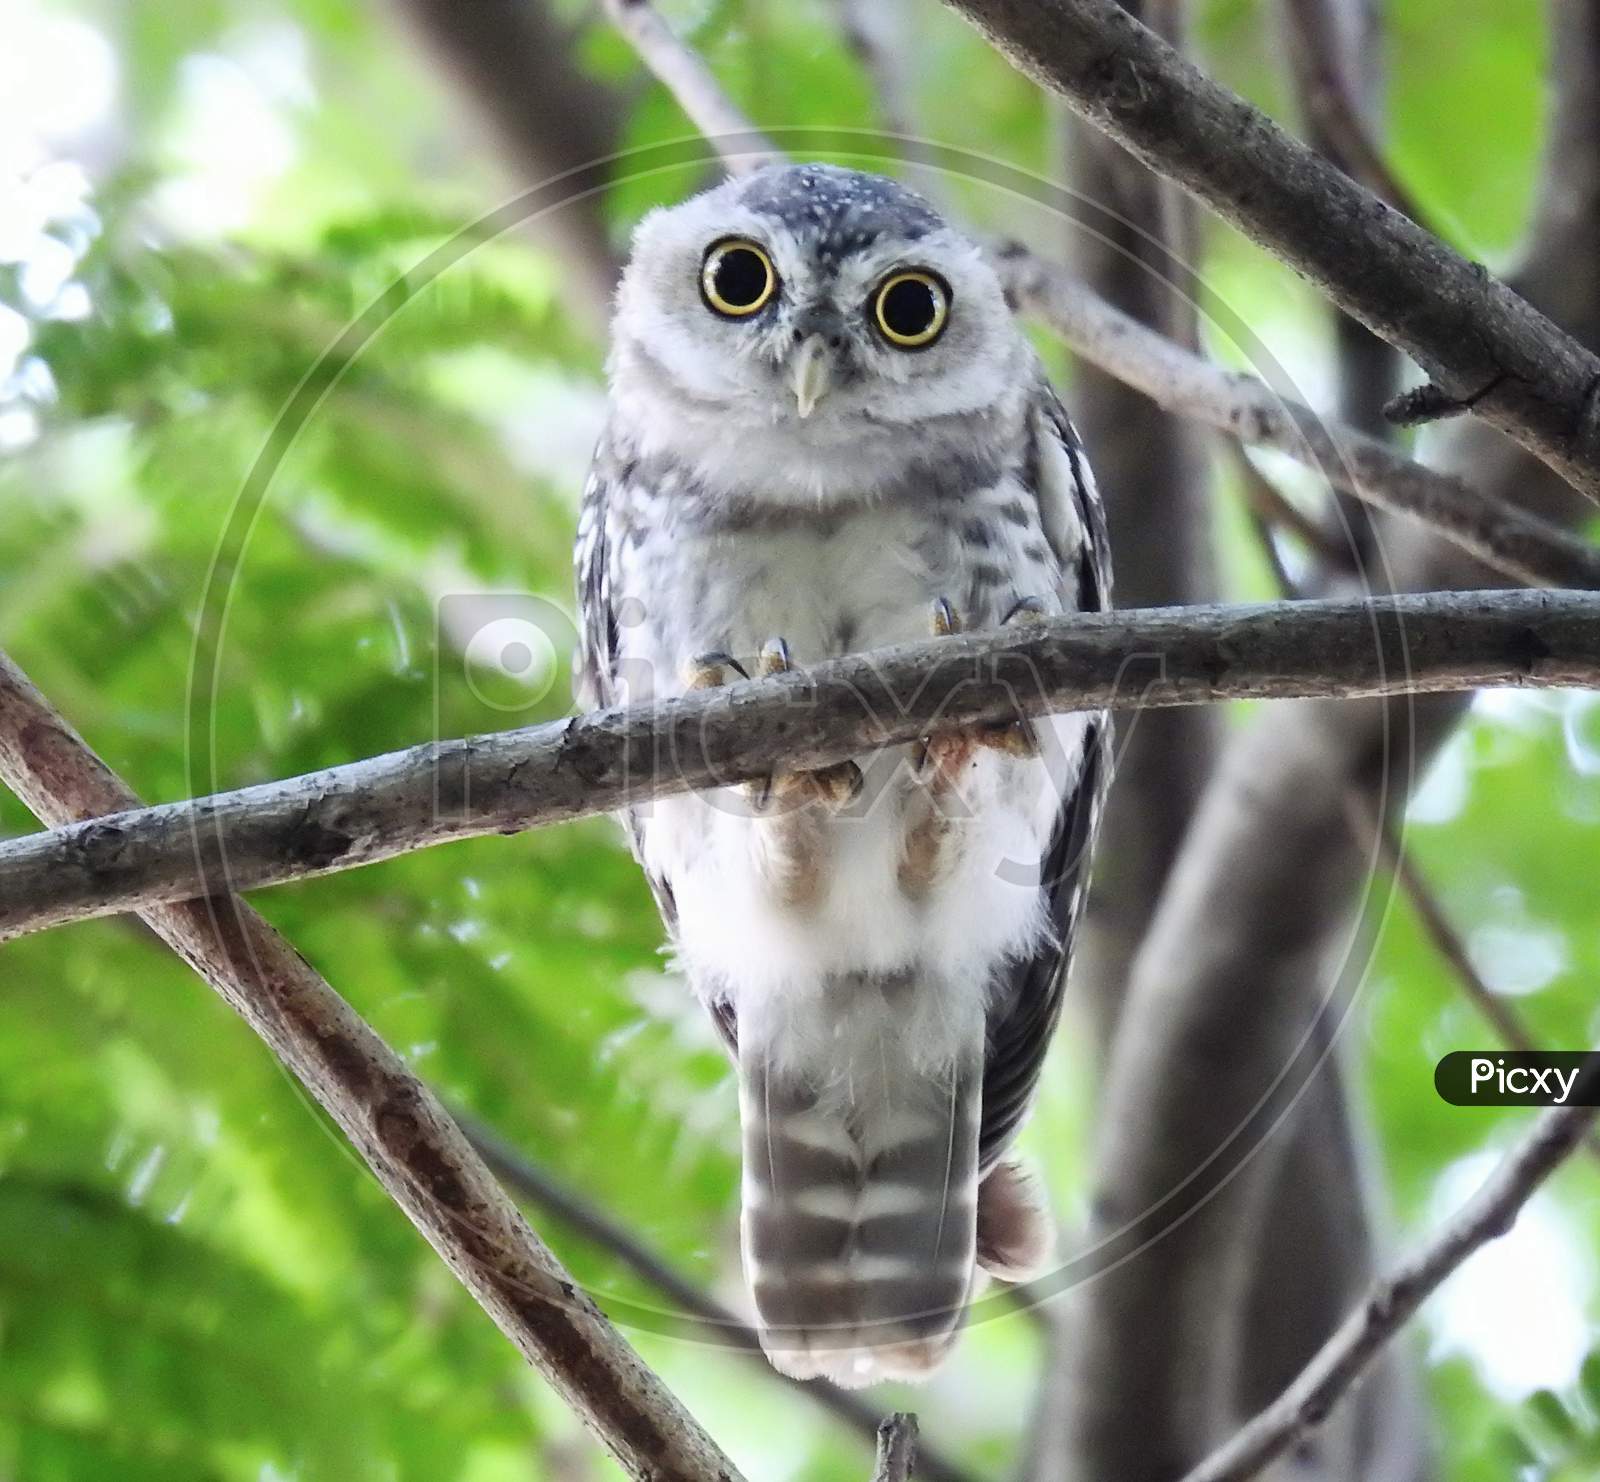 Owl (Spoted owlet) sited on a branch looking intensely